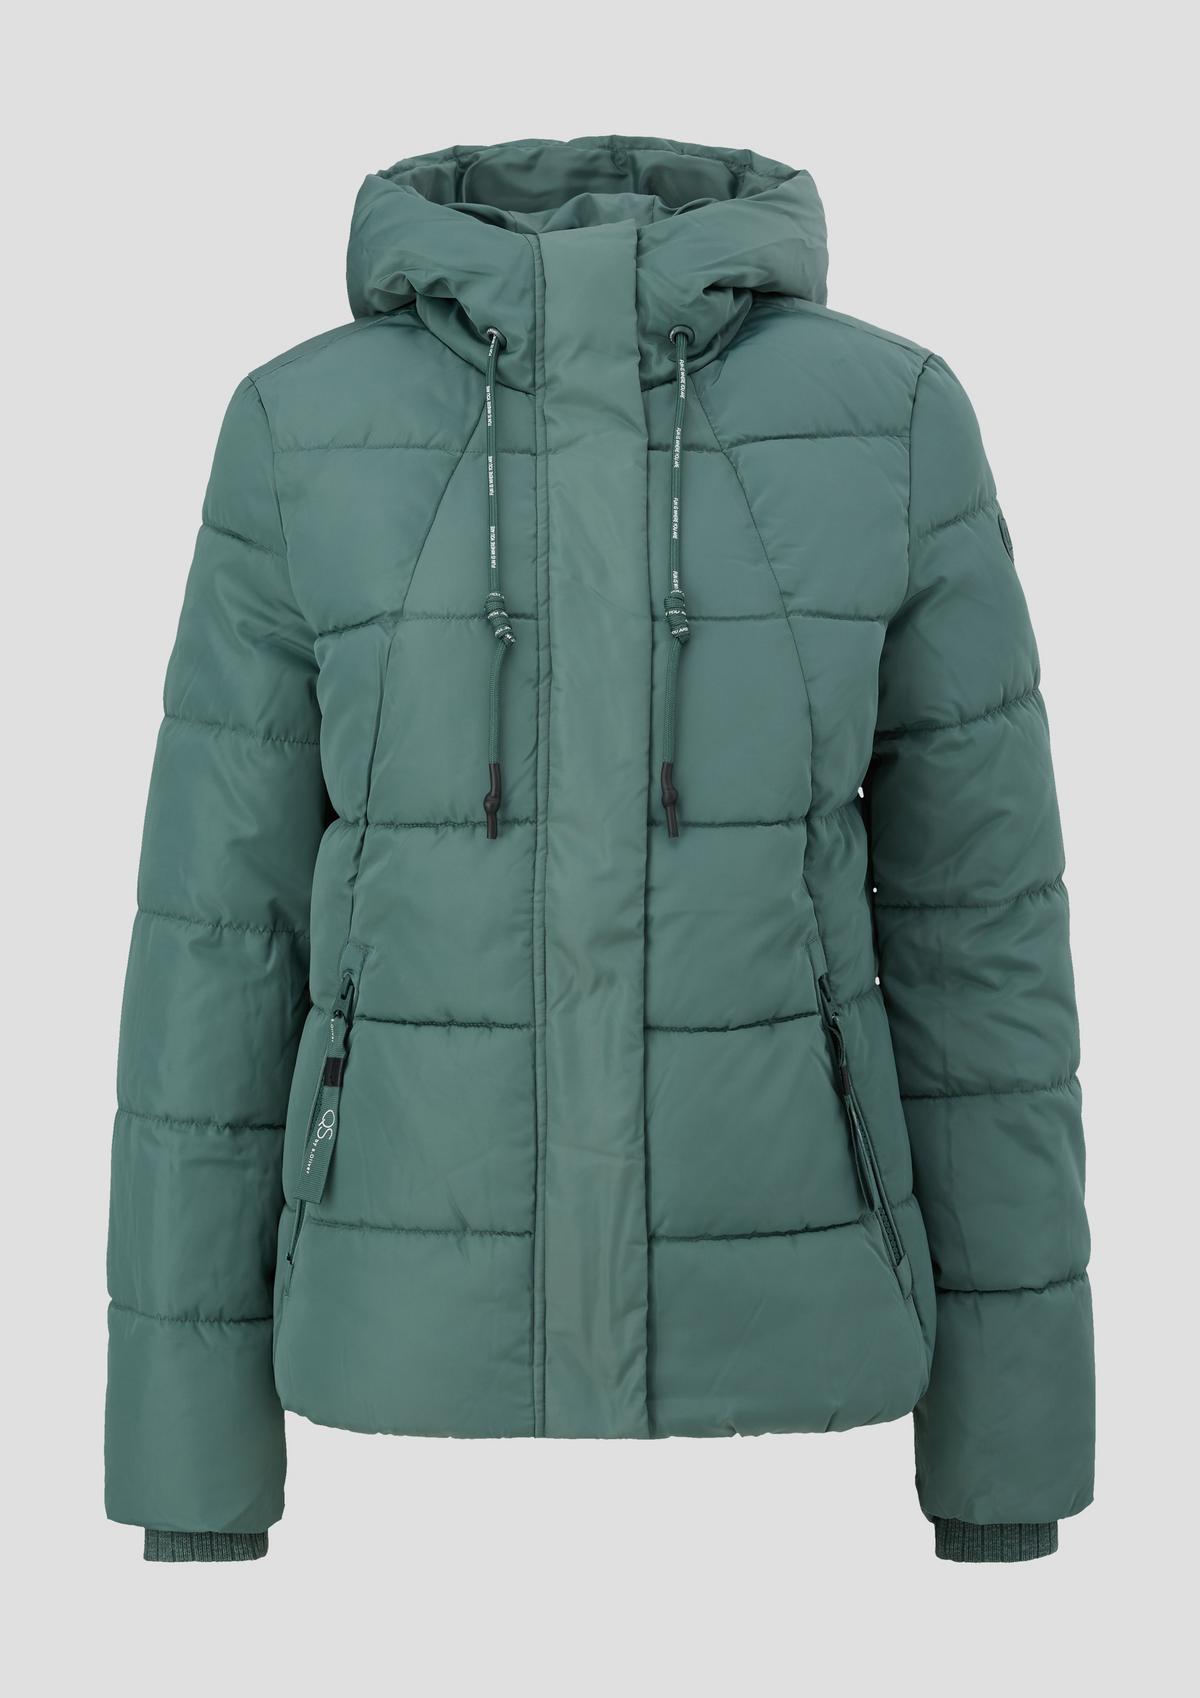 ocean Quilted zip jacket - pockets blue with